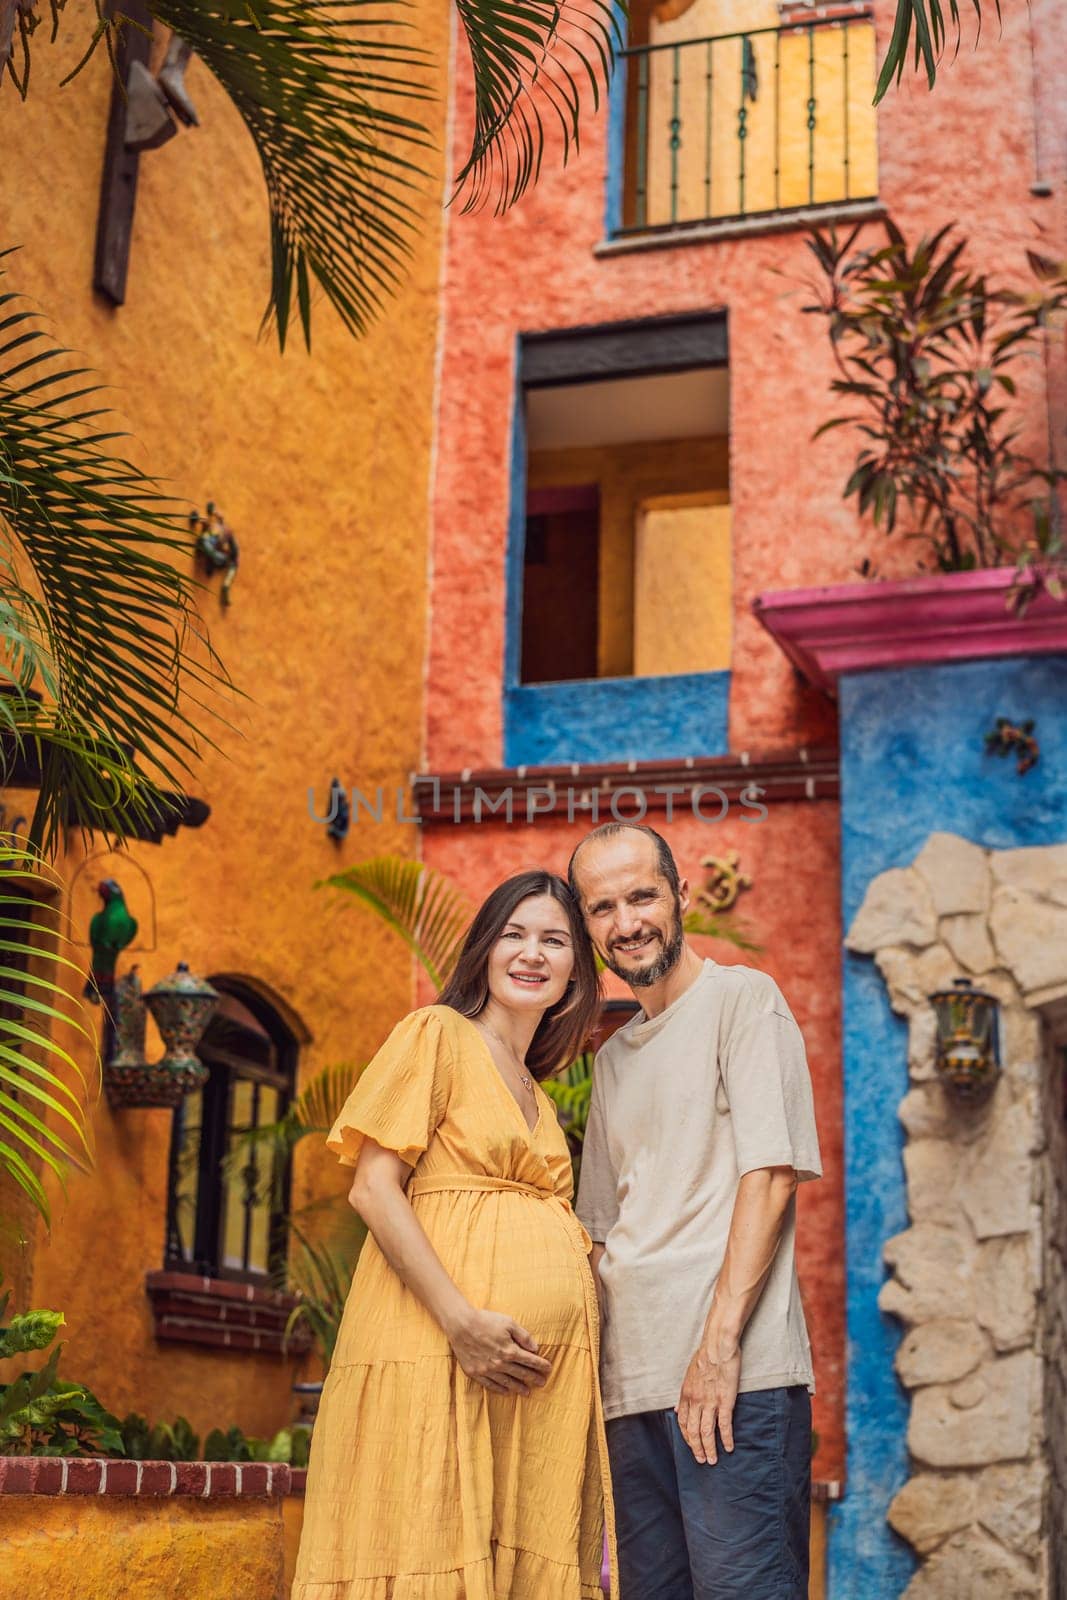 A loving couple in their 40s cherishing the miracle of childbirth in Mexico, embracing the journey of parenthood with joy and anticipation by galitskaya